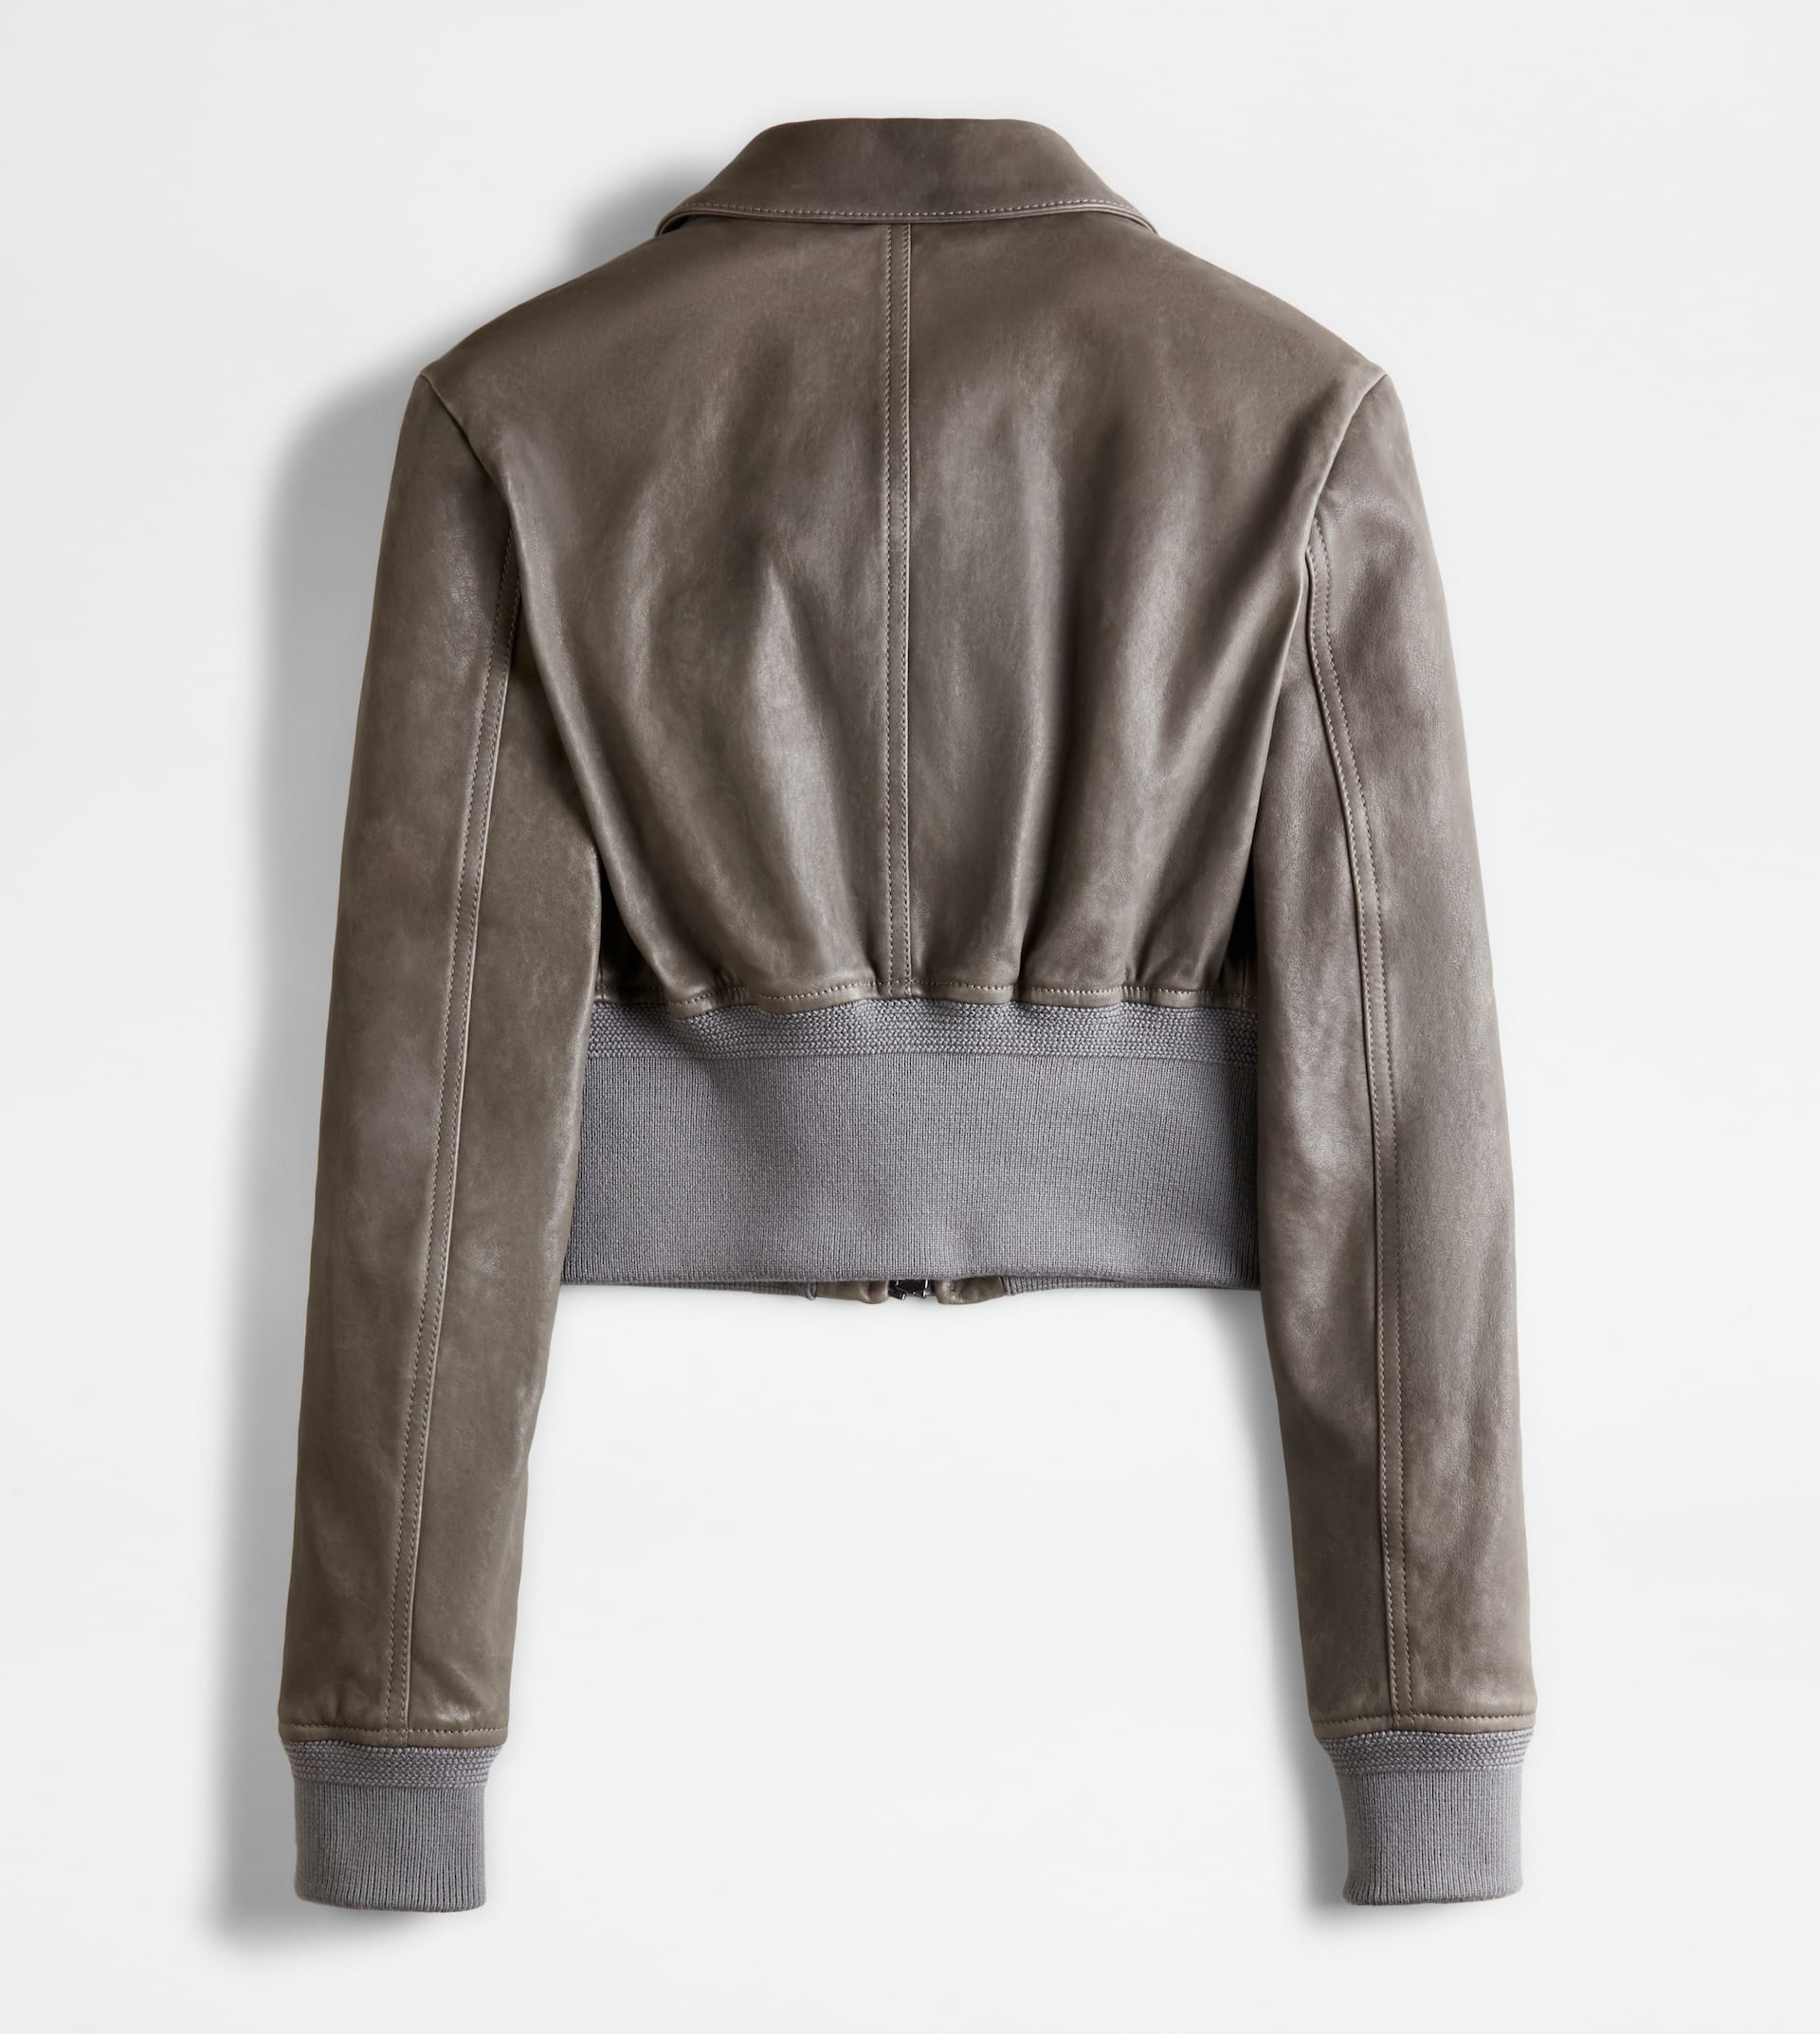 AVIATOR JACKET IN LEATHER - GREY - 7